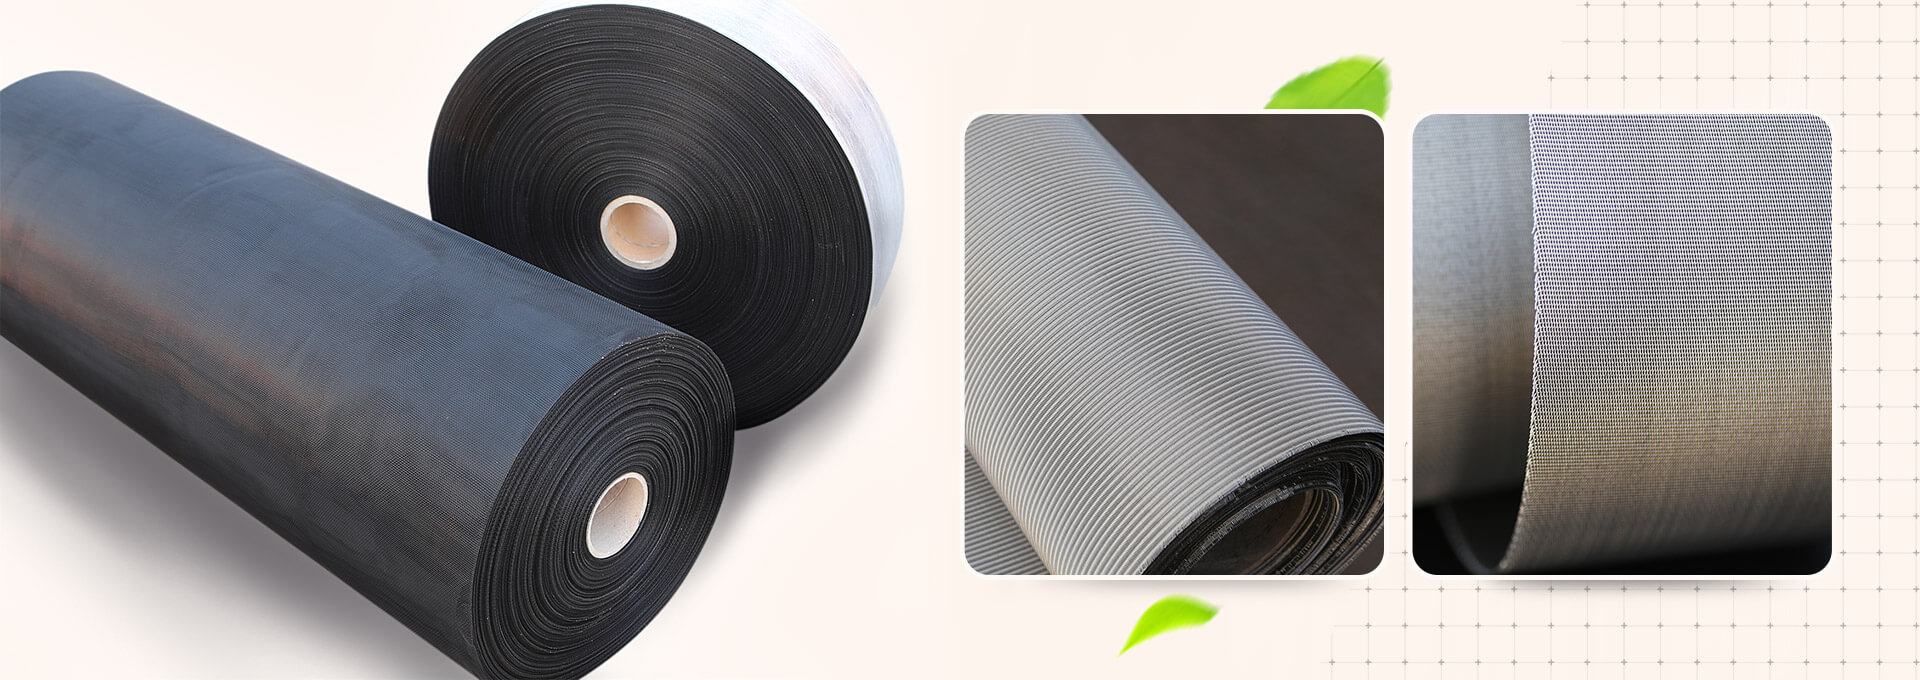 Woven Filter Mesh Suppliers and Factory - China Woven Filter Mesh